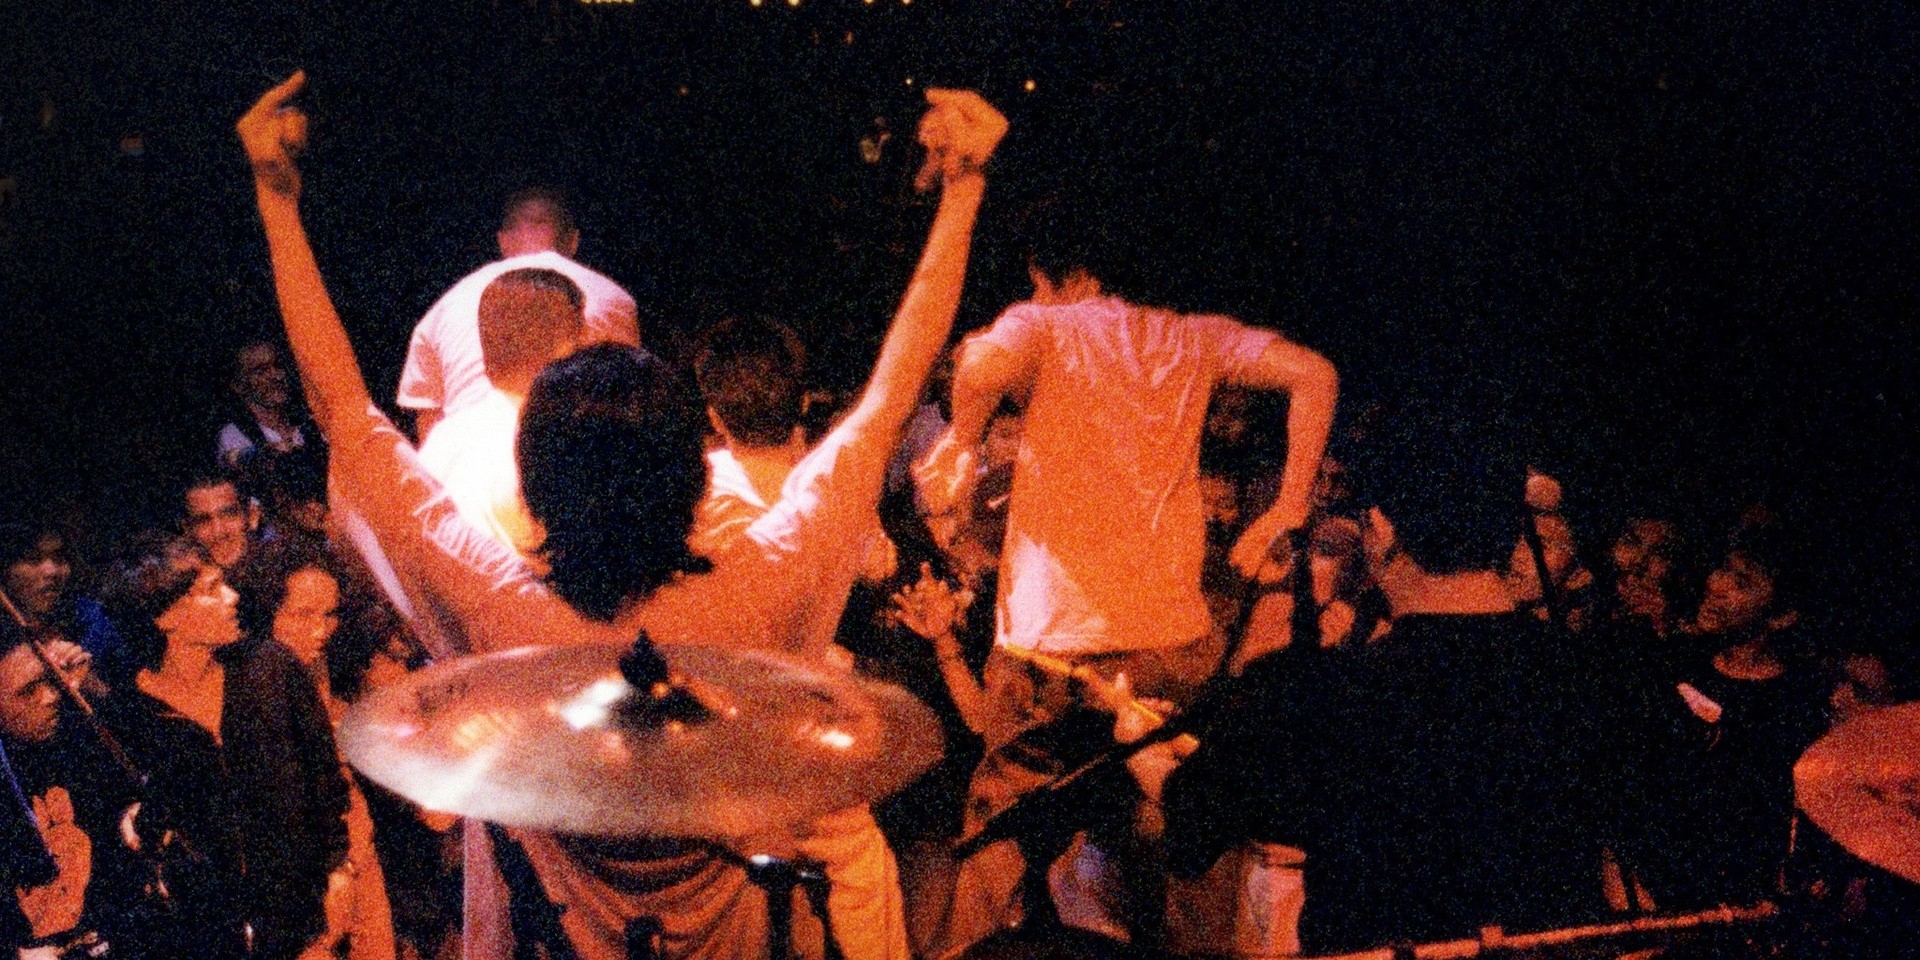 PHOTO GALLERY: Fugazi's frenzied second show in Singapore, 1996, with Stompin' Ground